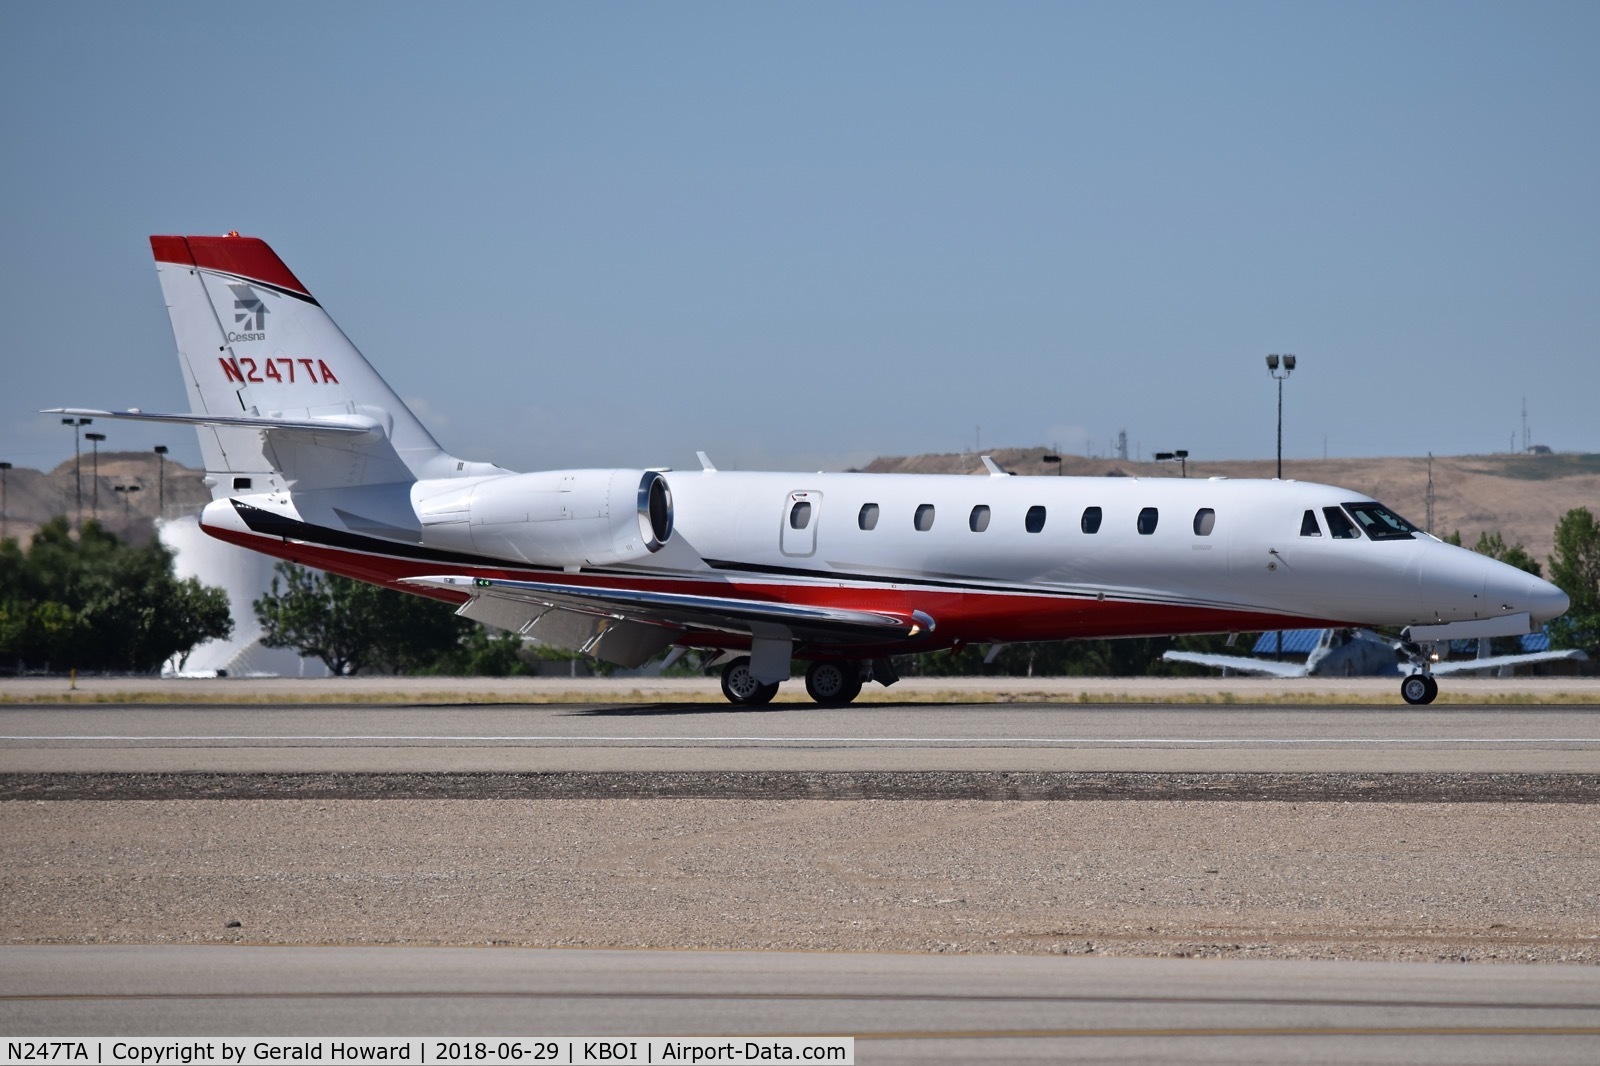 N247TA, 2007 Cessna 680 Citation Sovereign C/N 680-0131, Landing roll out on RWY 28R.